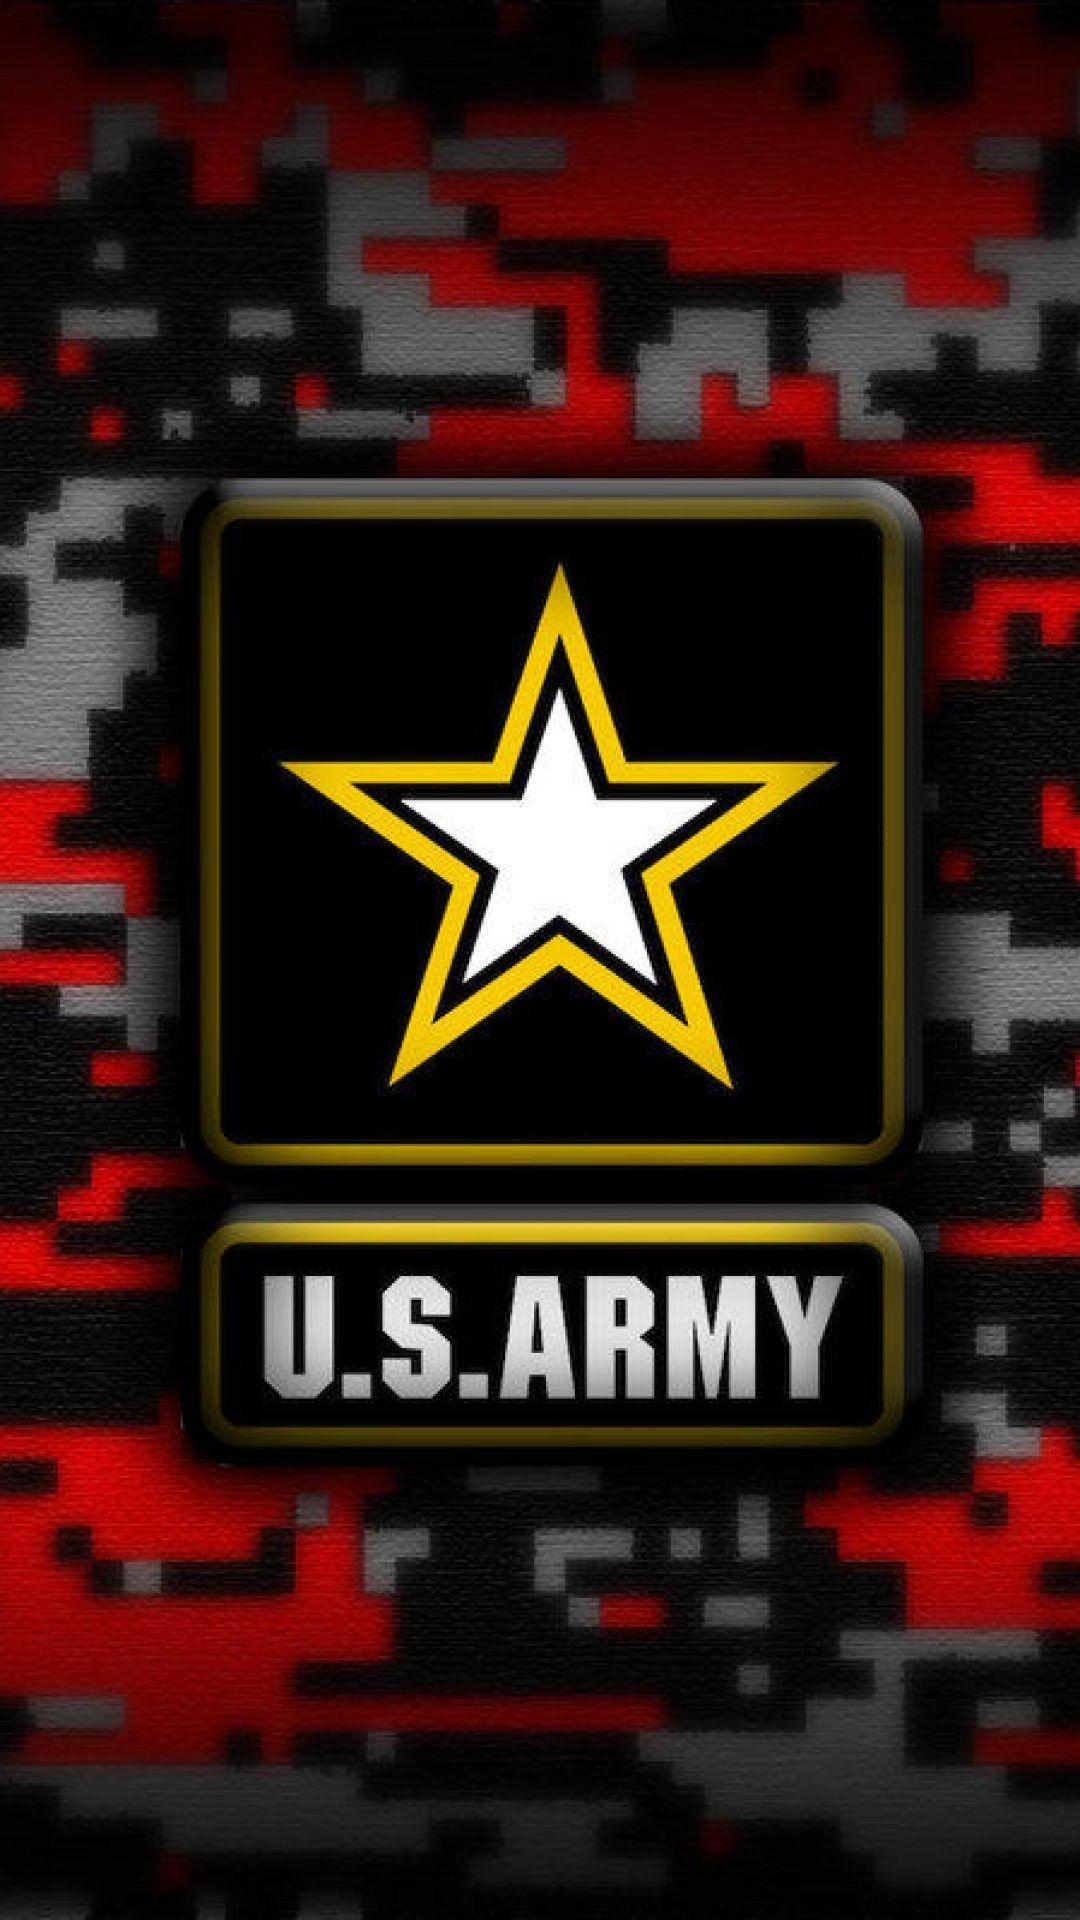 US Army iPhone Wallpaper